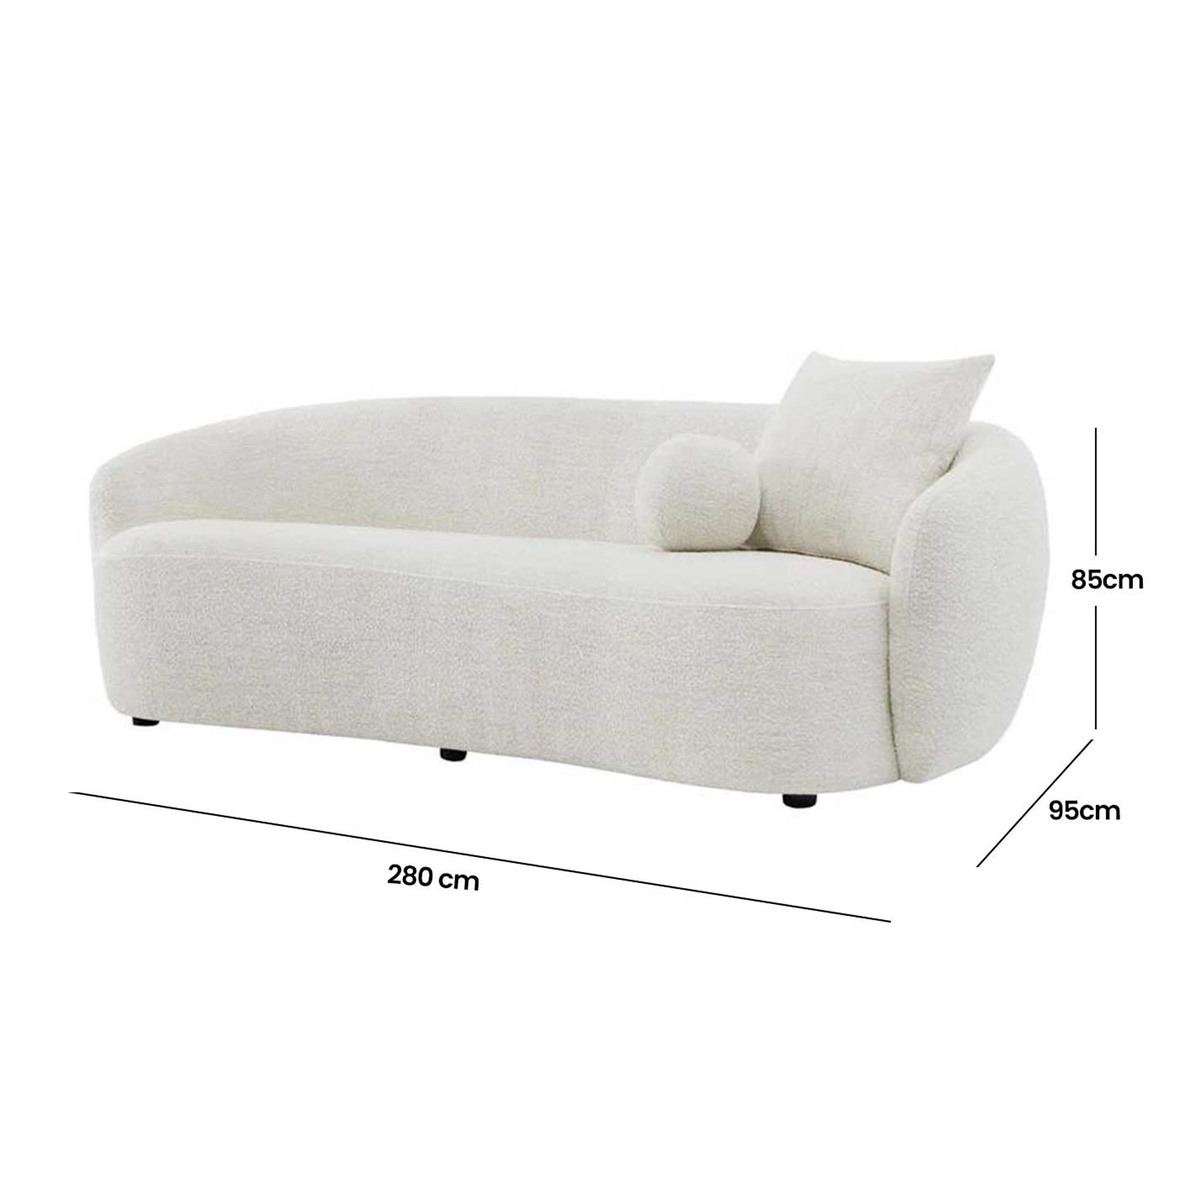 Novara Beige, 2-Seater Upholstery Fabric Sofa -Recliner Luxury Design, Perfect Choice for Living Room Furniture